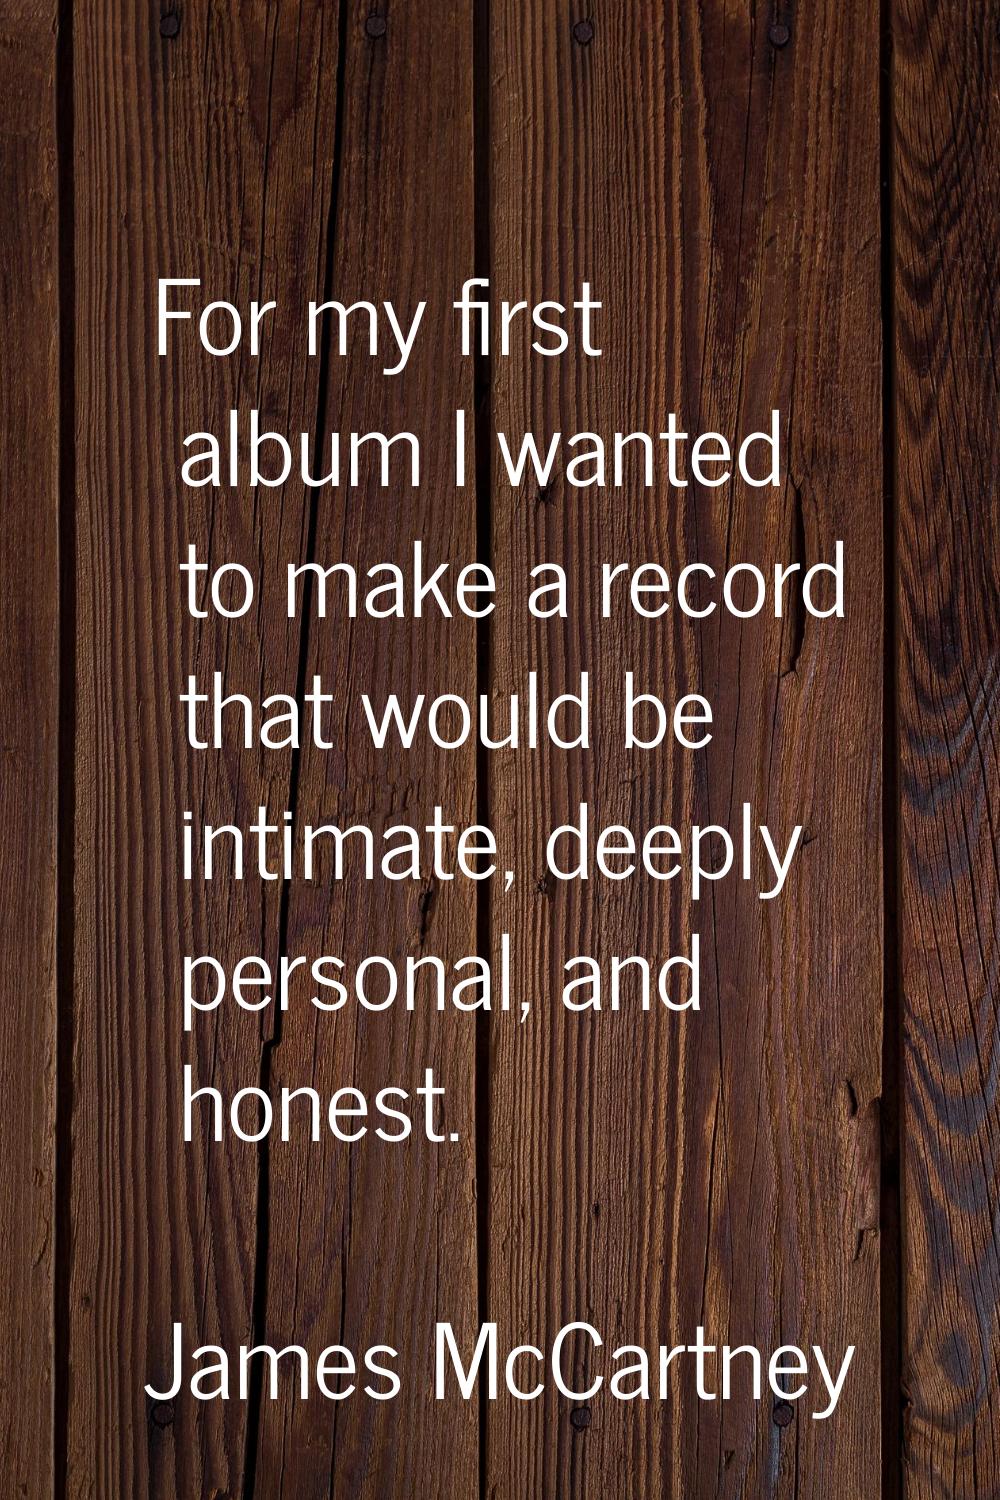 For my first album I wanted to make a record that would be intimate, deeply personal, and honest.